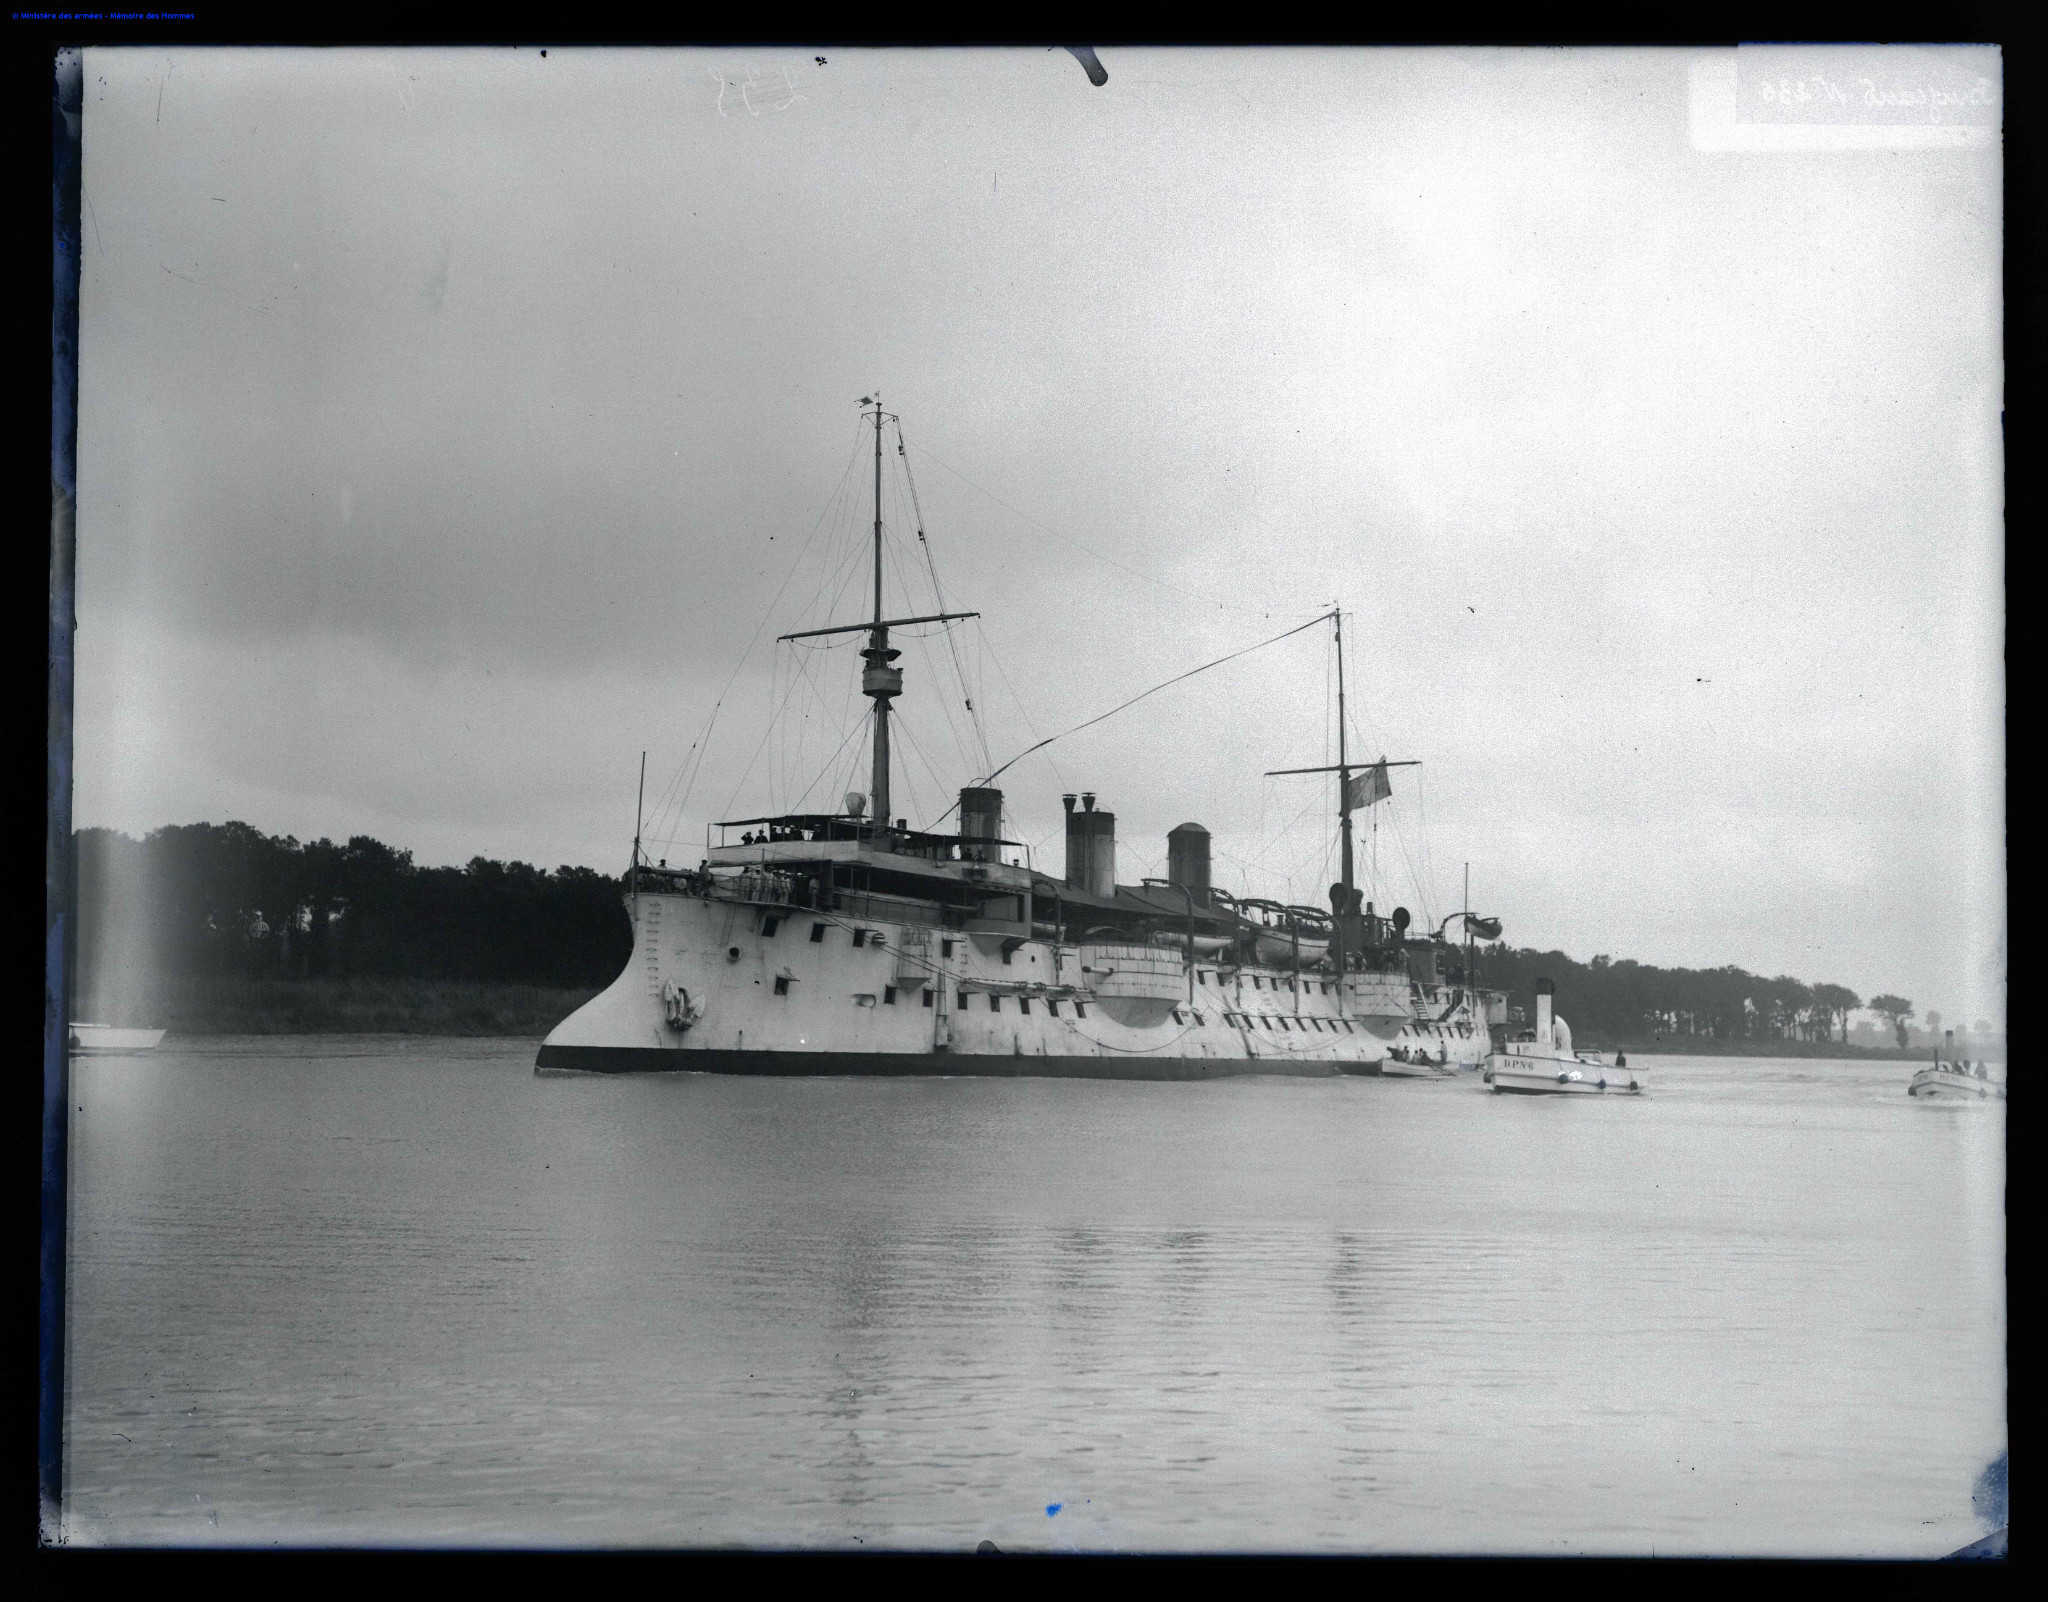 Bugeaud (Cherbourg 1904) archives_SHDMR__MR_5_G_51__0001.jpg